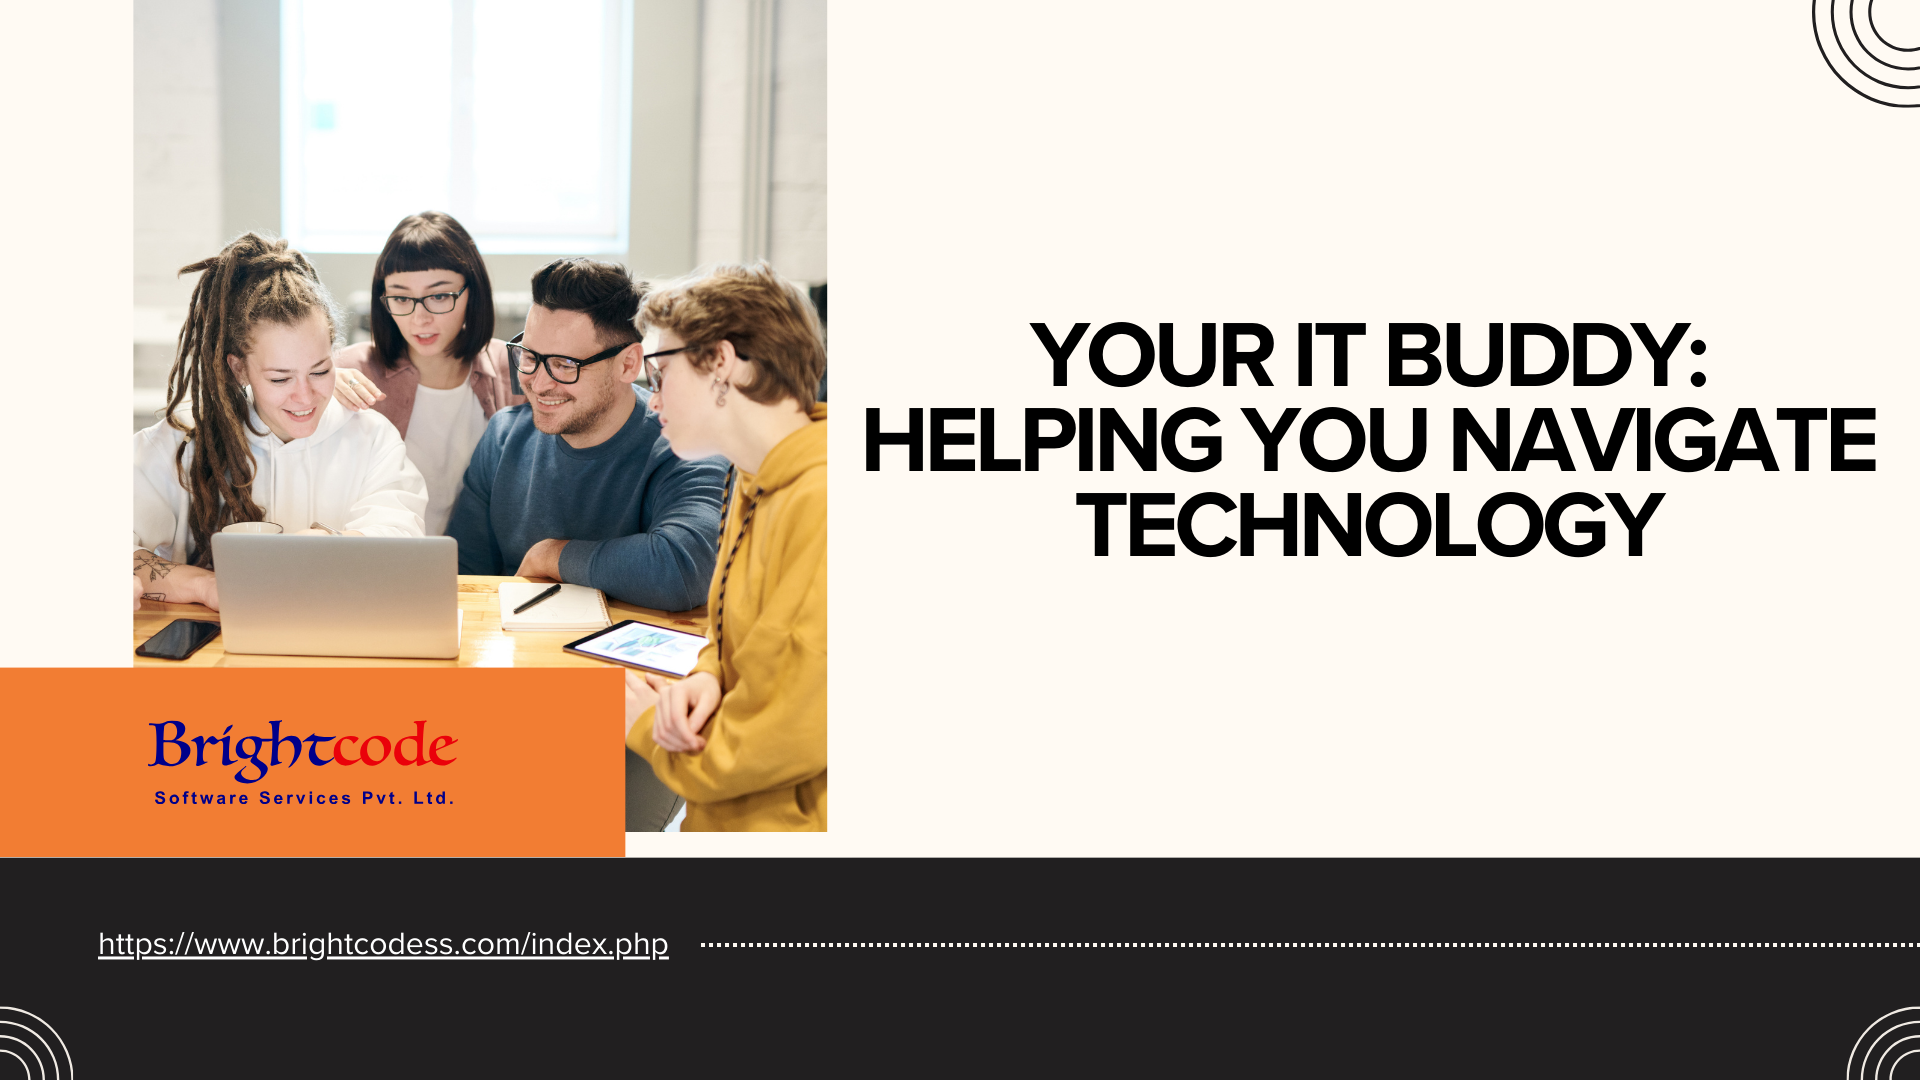 Your IT Buddy: Helping You Navigate Technology